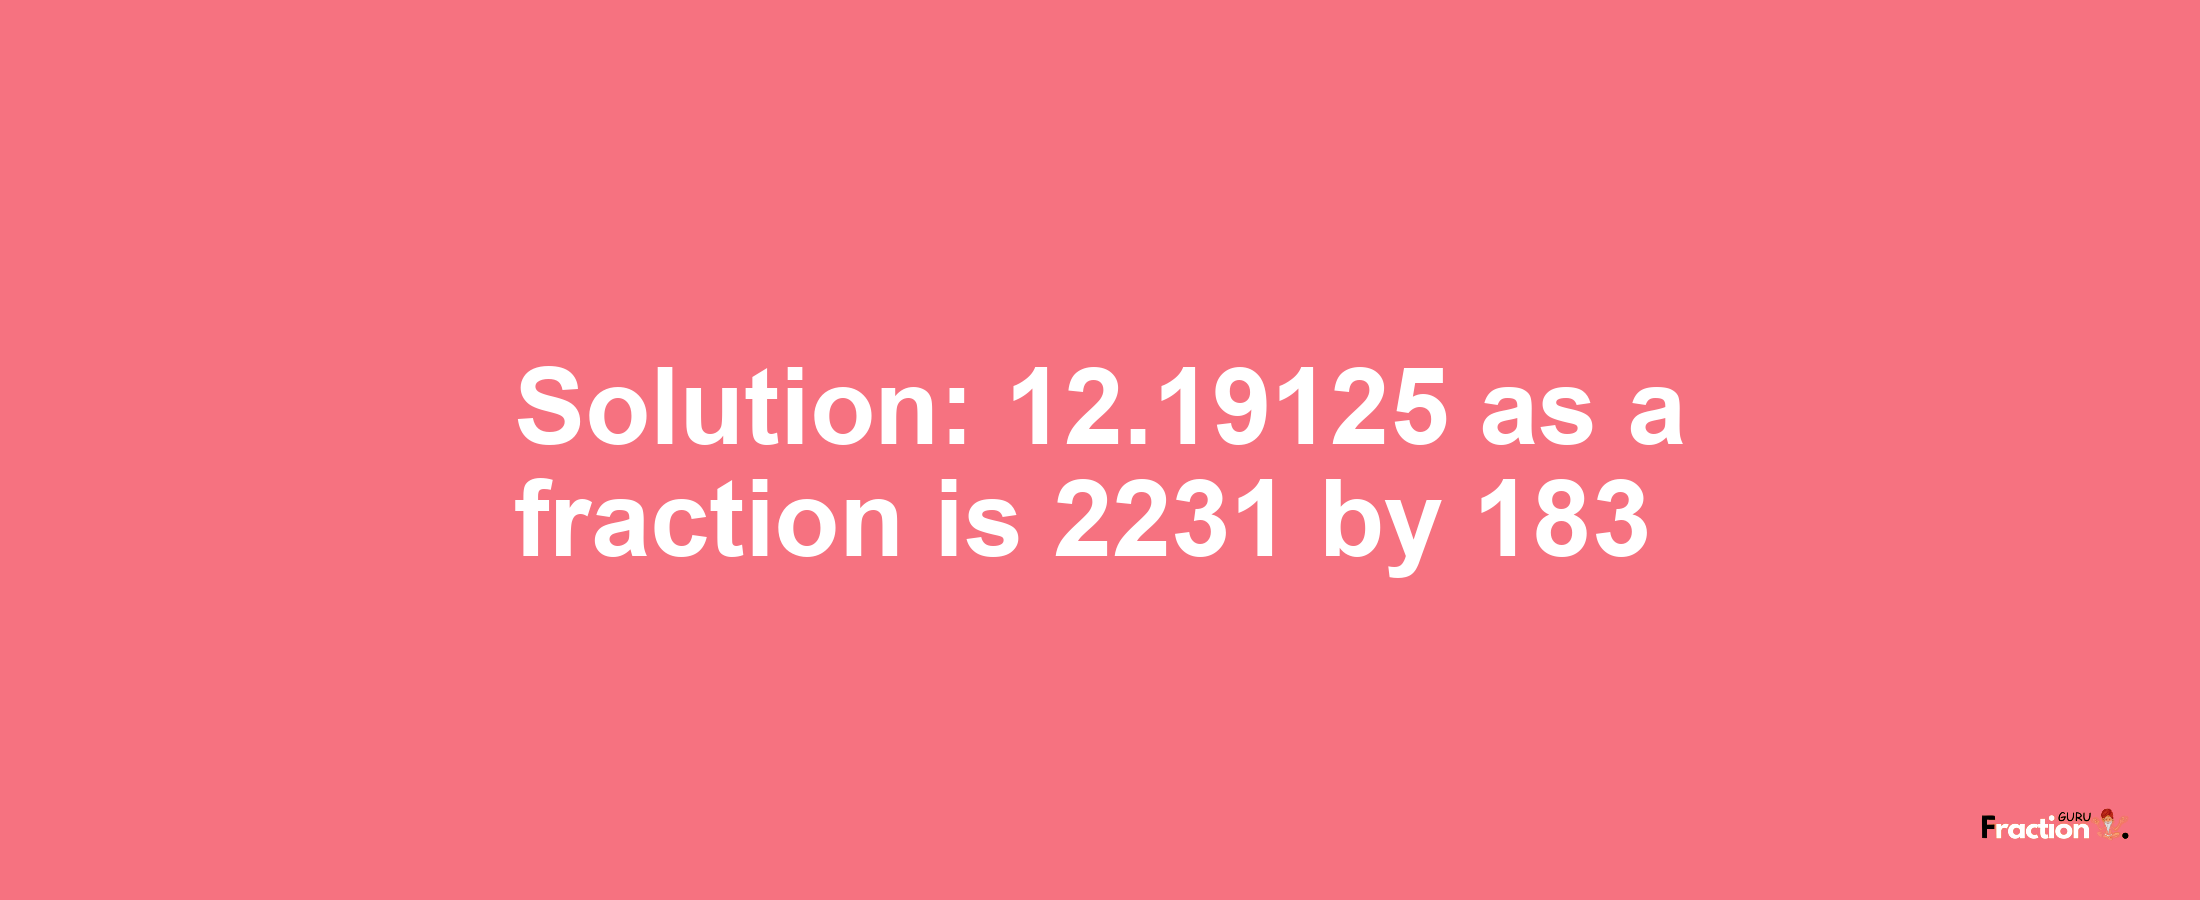 Solution:12.19125 as a fraction is 2231/183